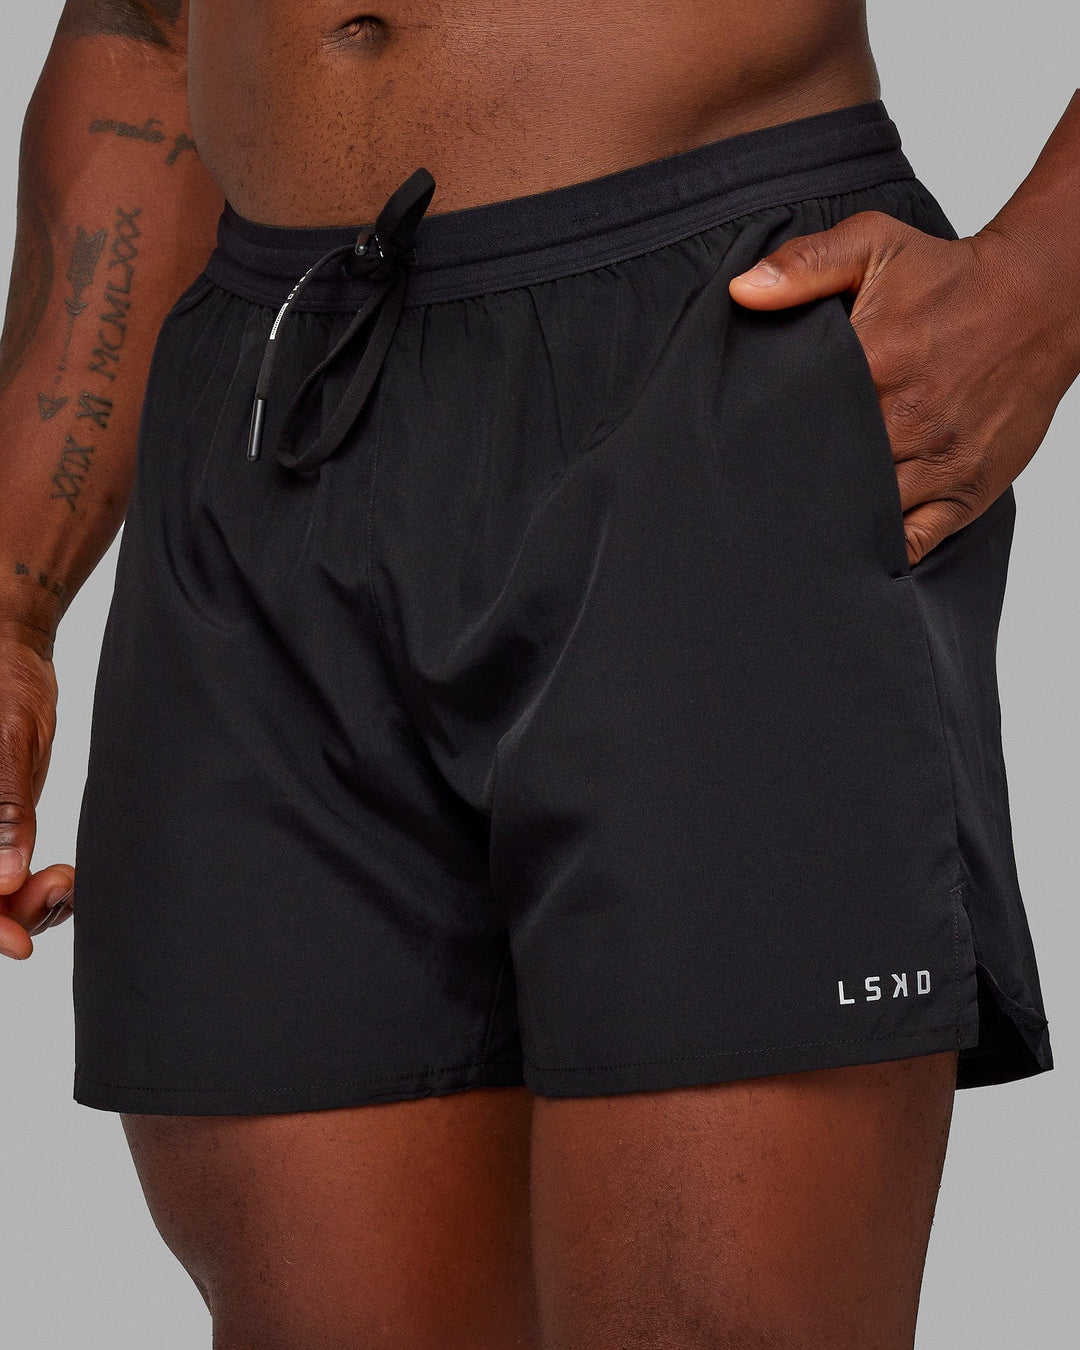 Man wearing Pace 5" Lined Performance Shorts - Black-Reflective